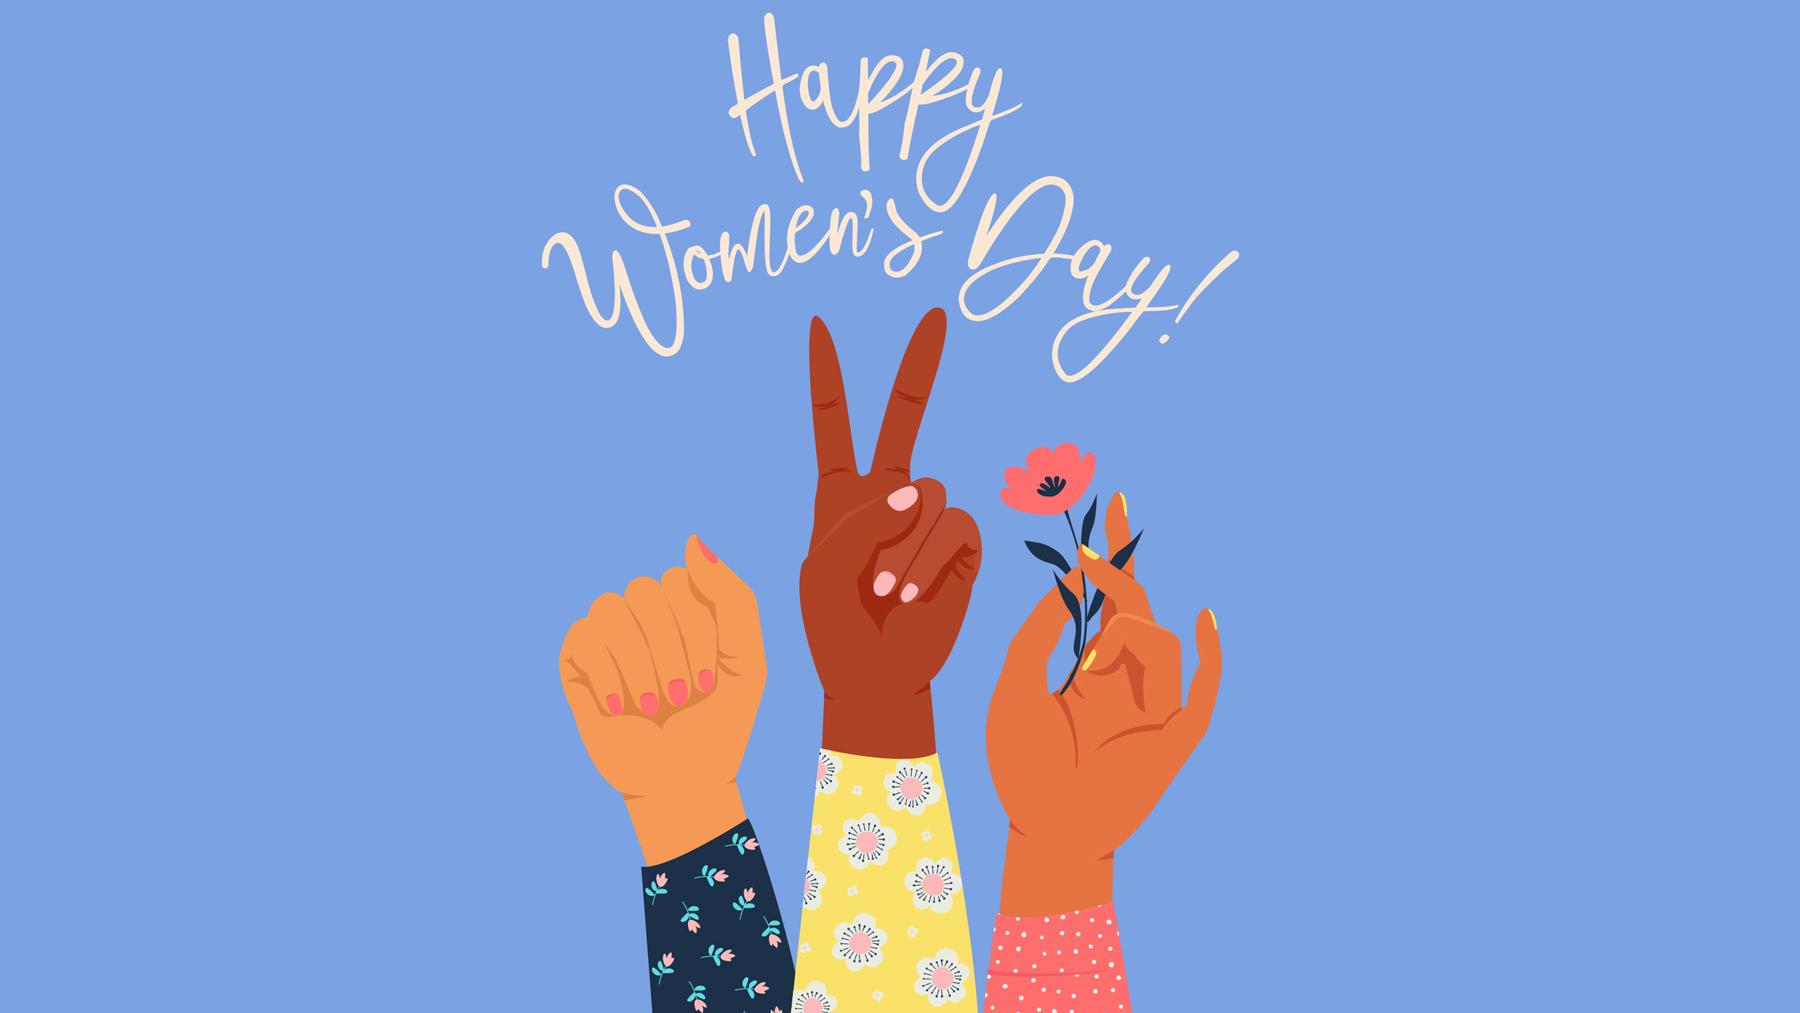 International Women's Day 2020: Theme, History, Hashtags, and More